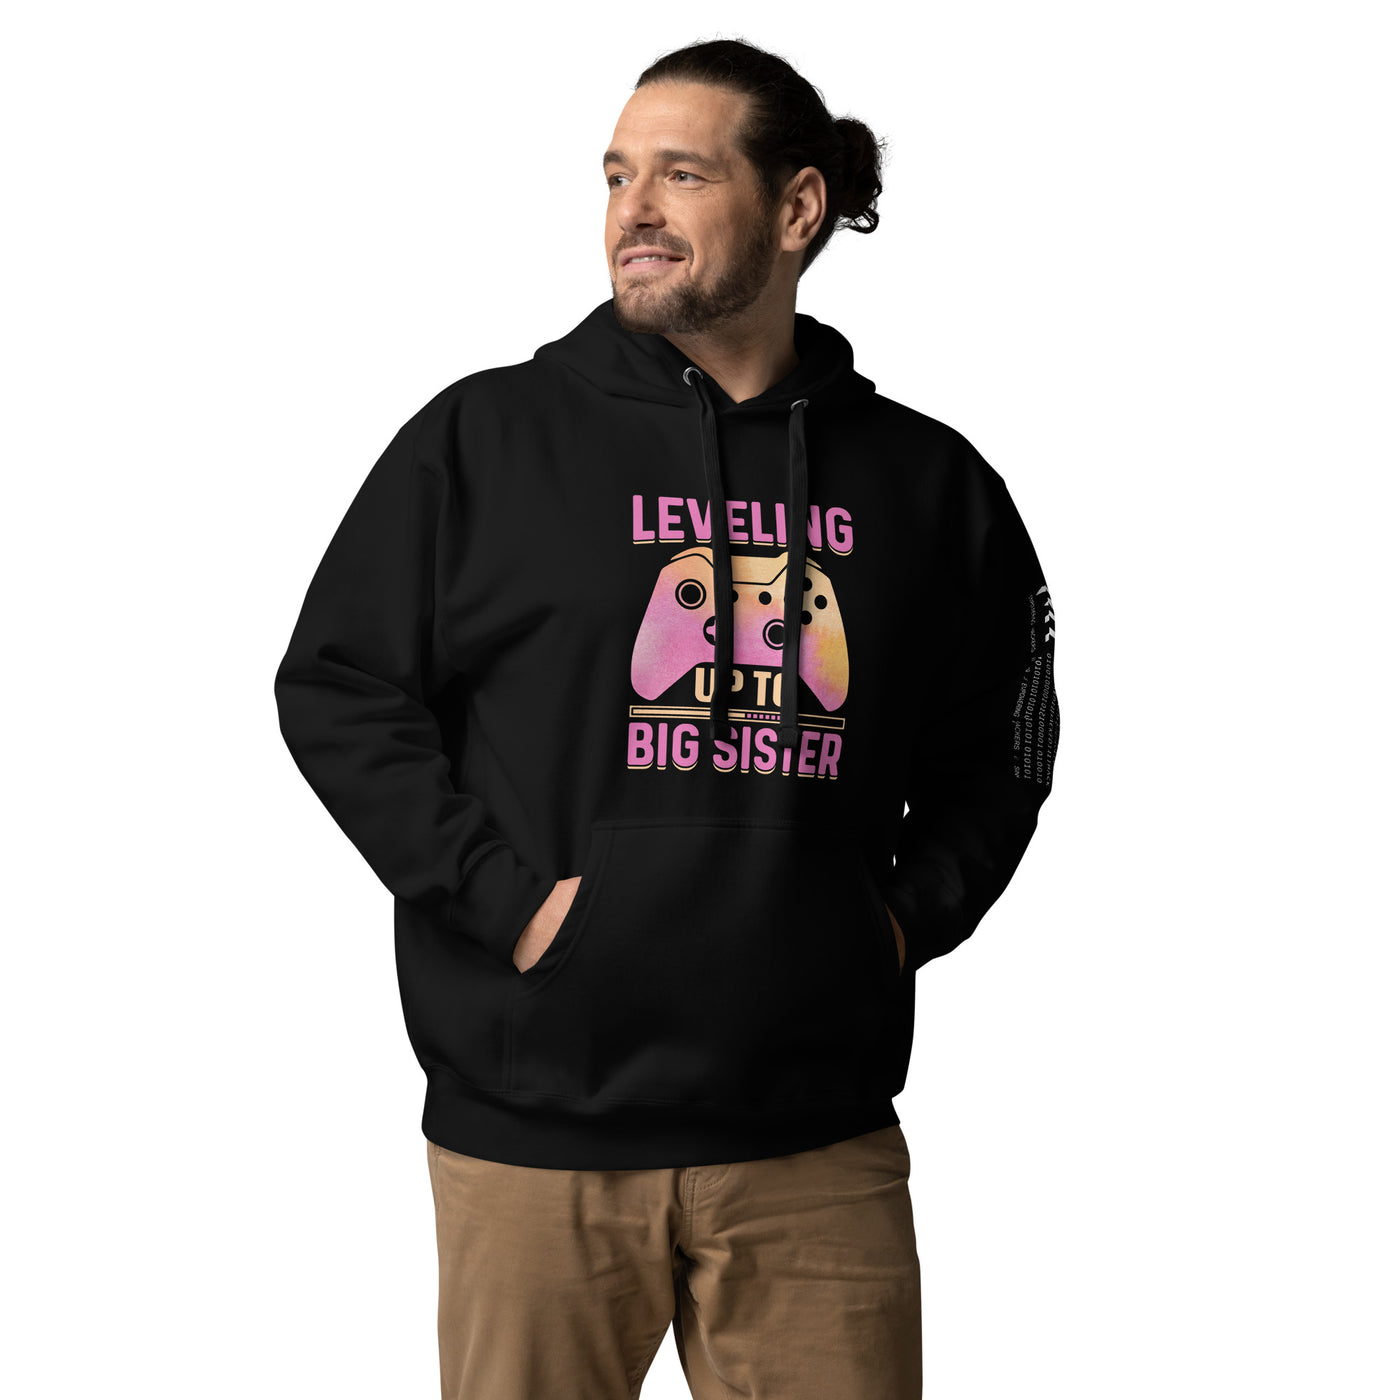 Levelling up to Big Sister - Unisex Hoodie